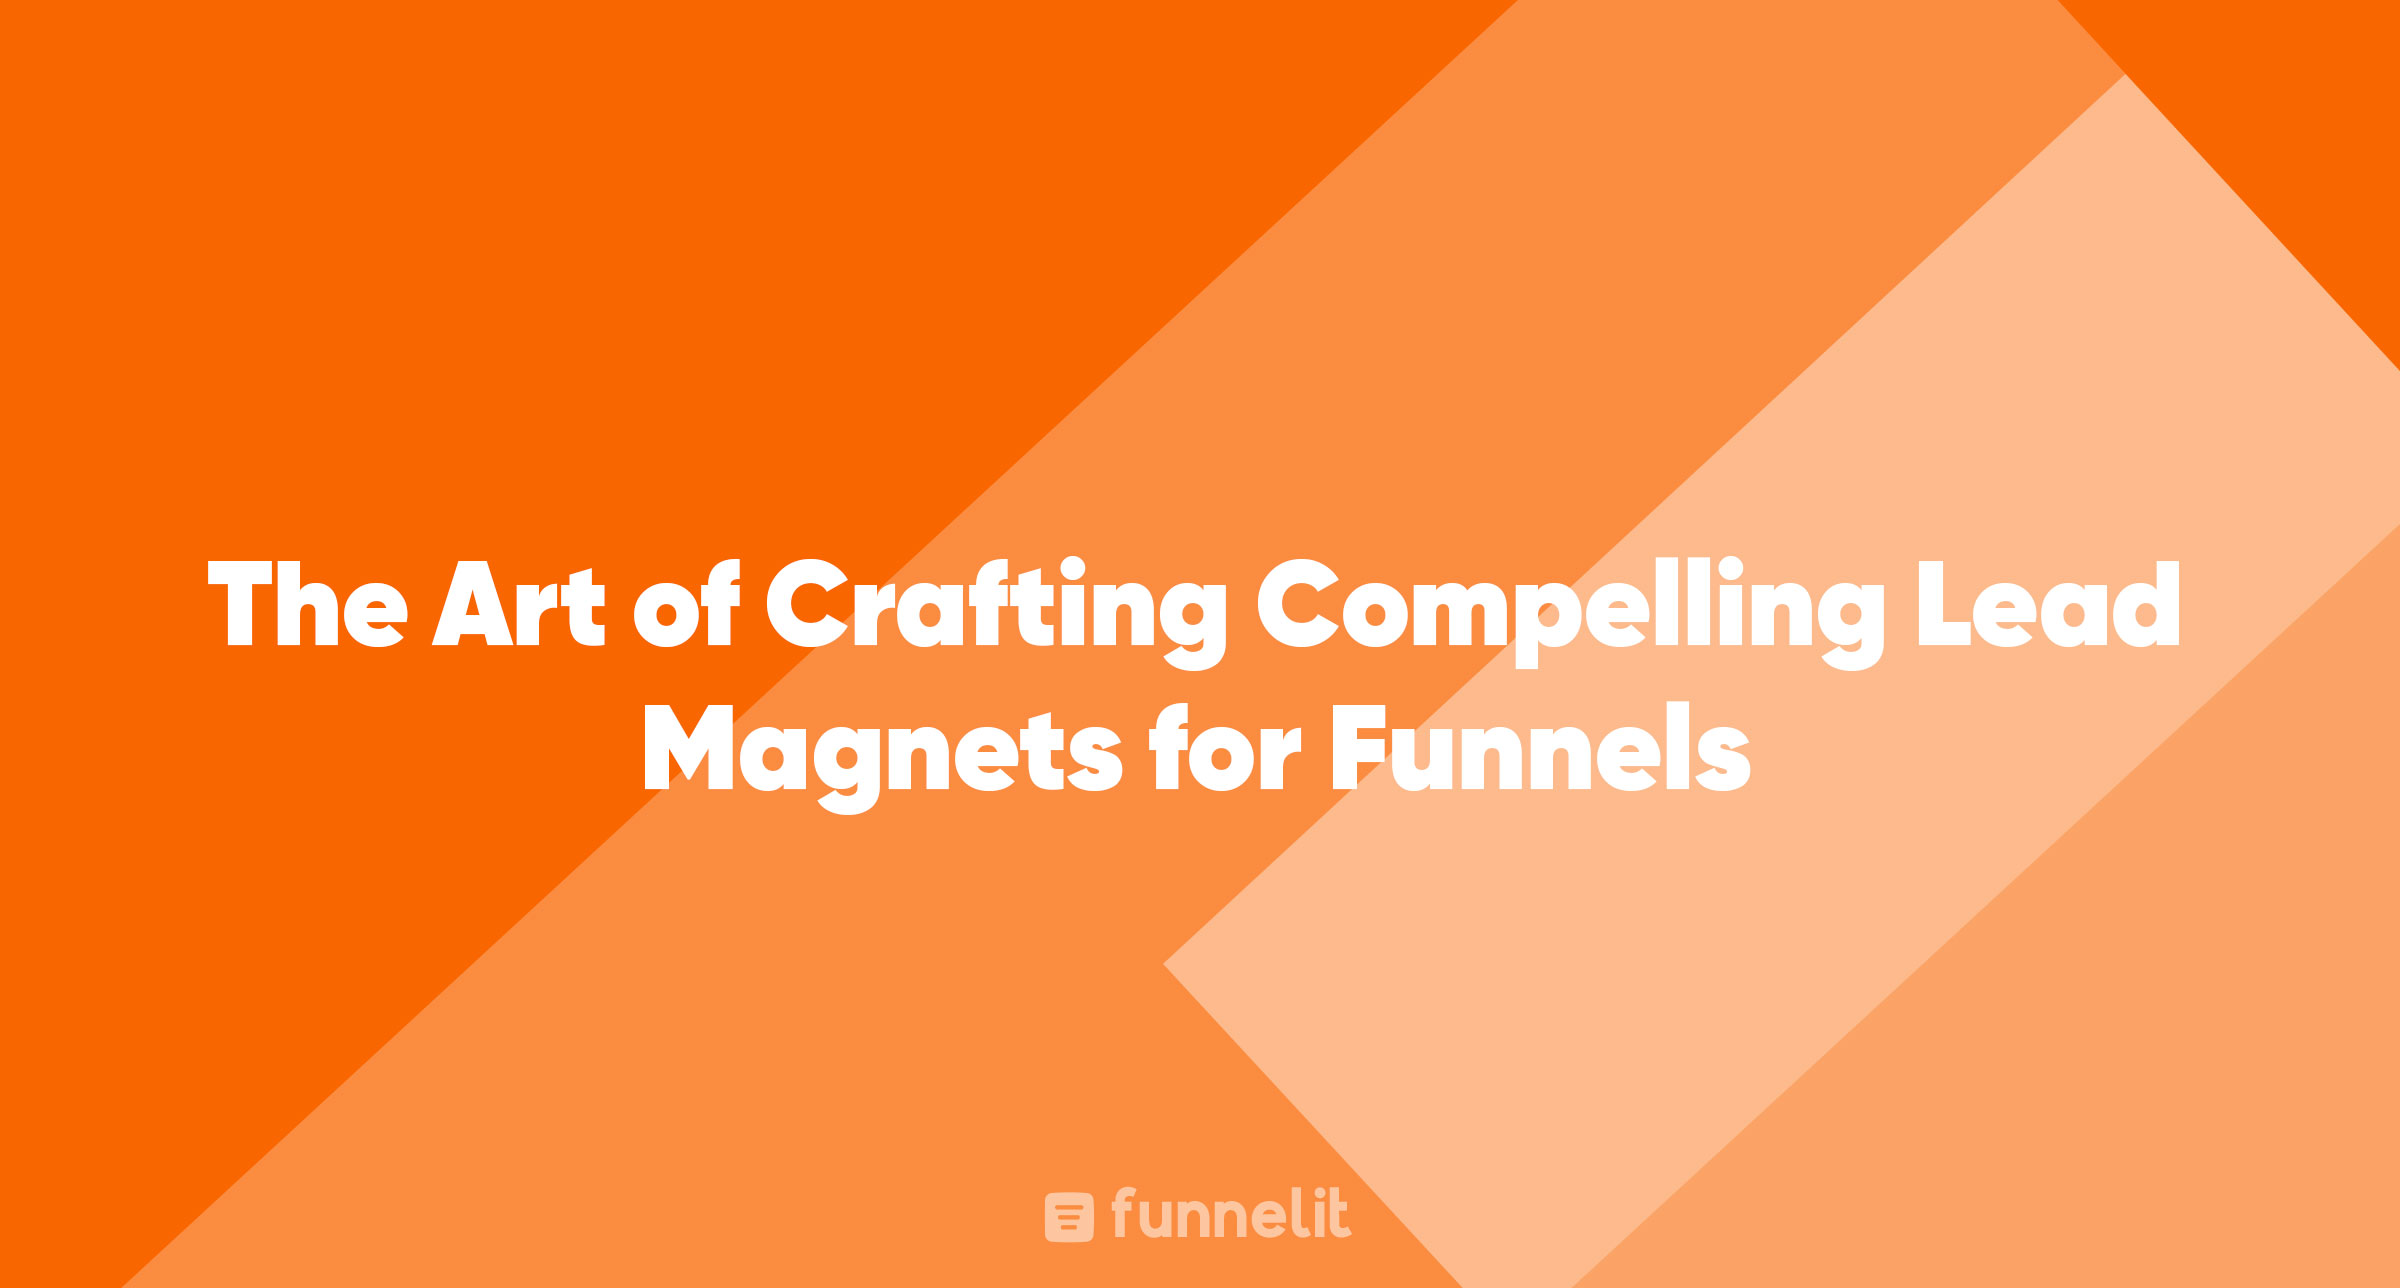 Article | The Art of Crafting Compelling Lead Magnets for Funnels